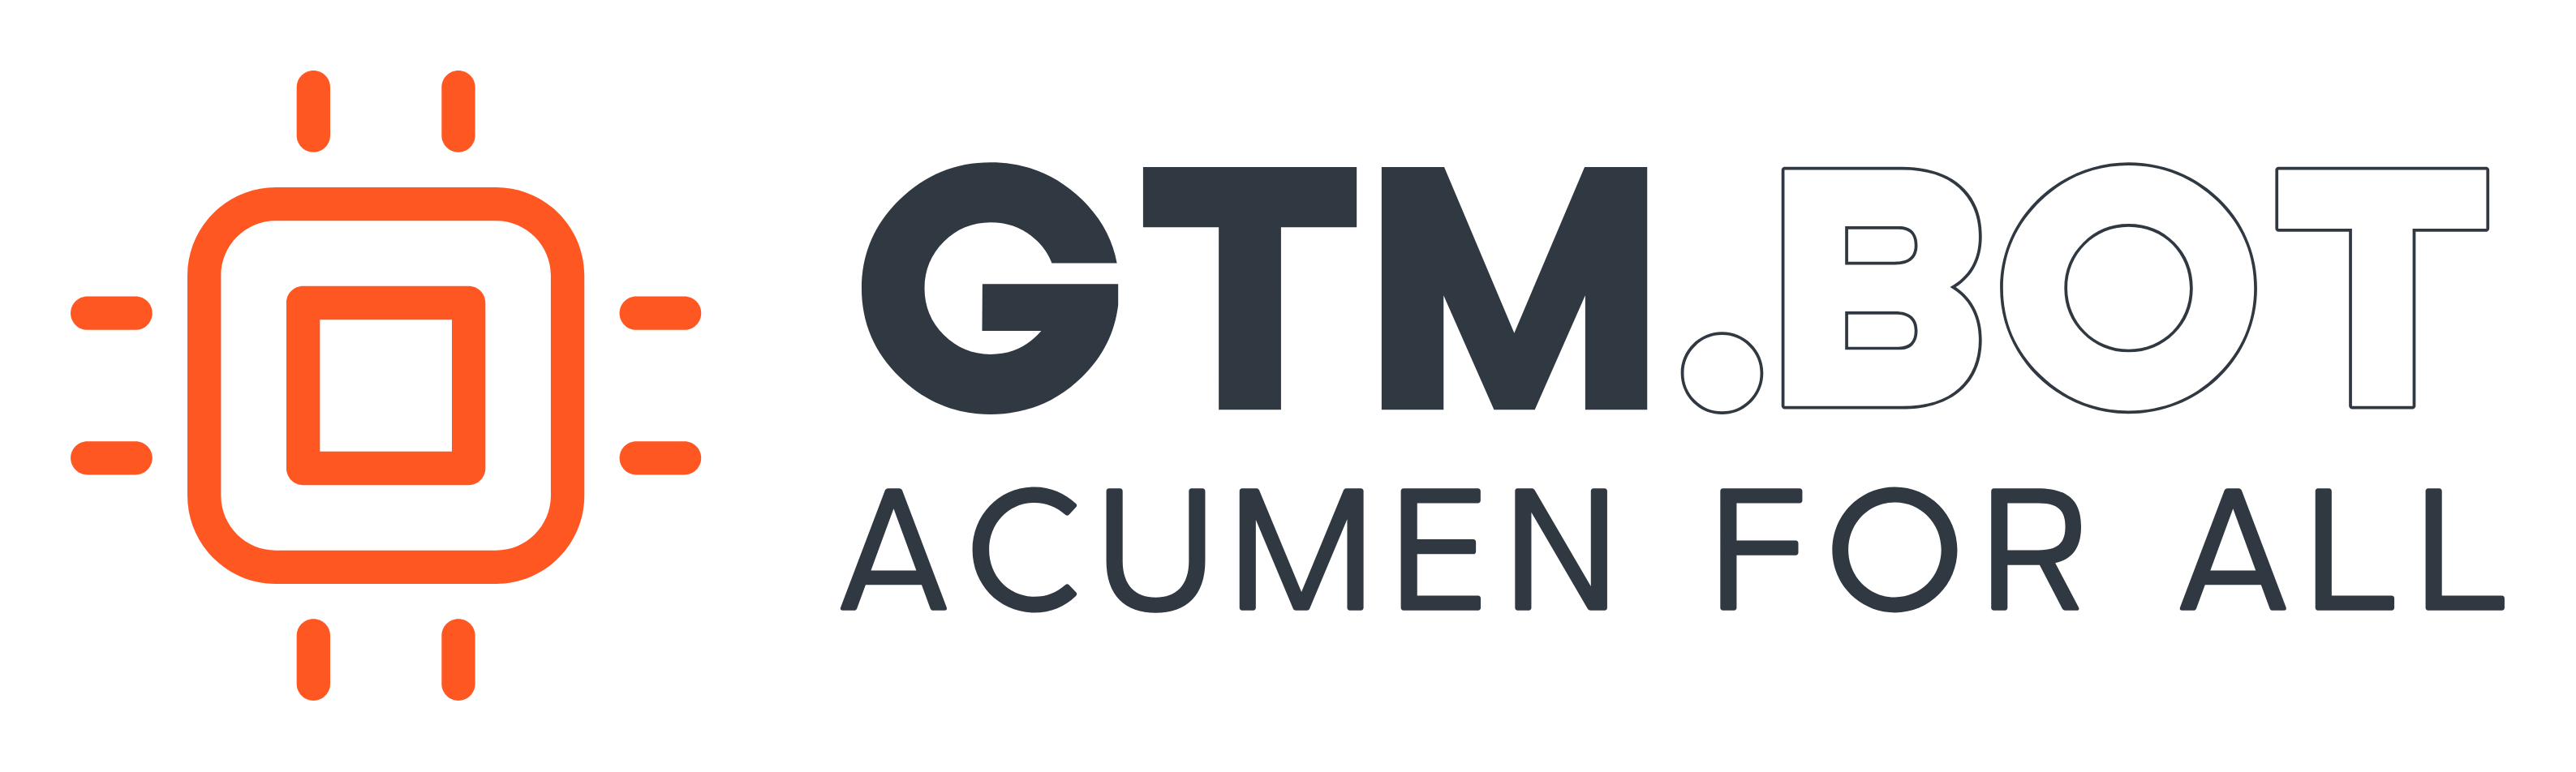 GTM.bot logo -- a computer chip wrapped around the name and phrase "Acumen for All"